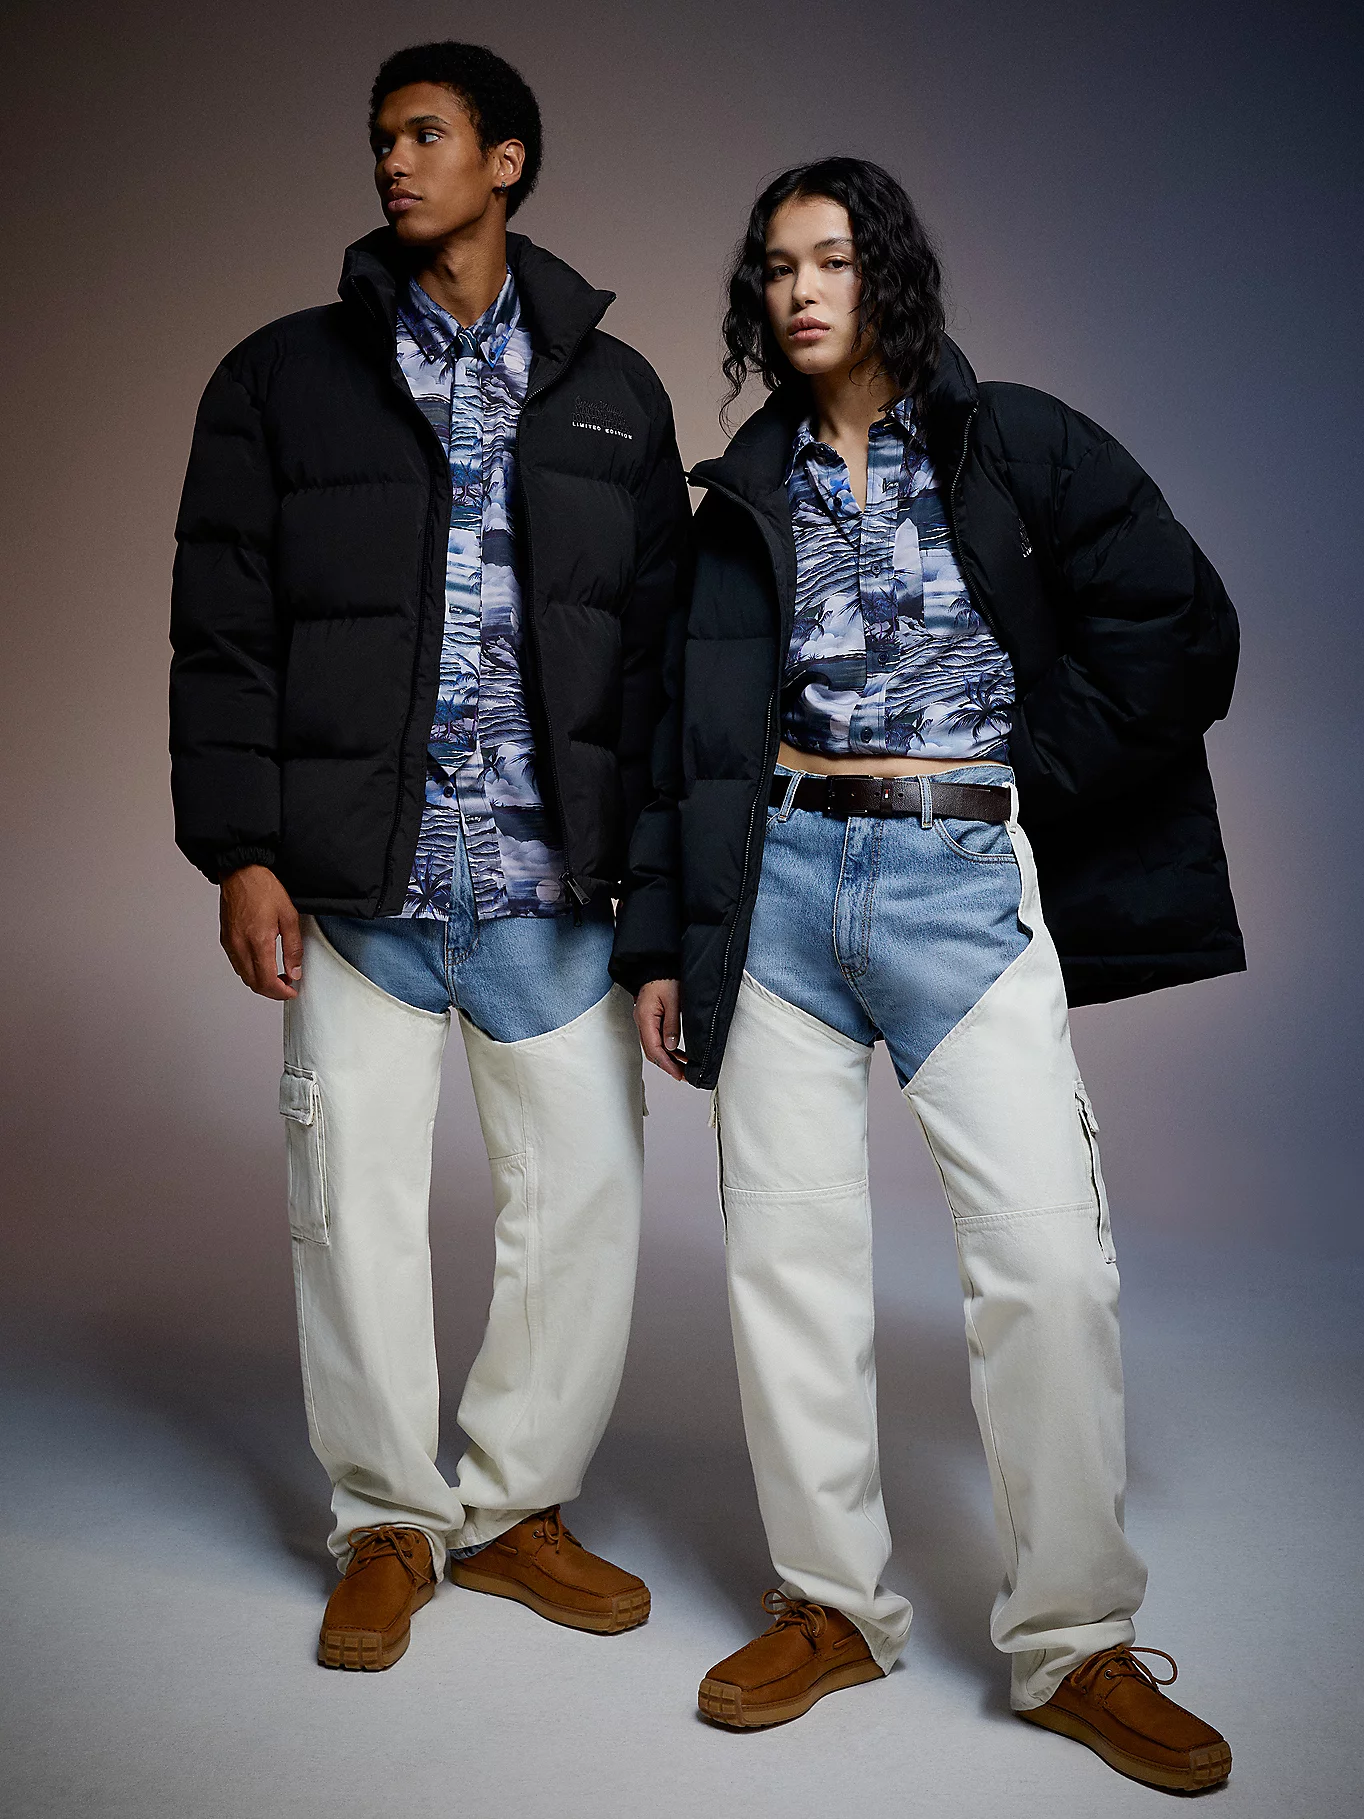 Tommy Hilfiger Jeans x Martine Rose Capsule Collection. - BlackBox